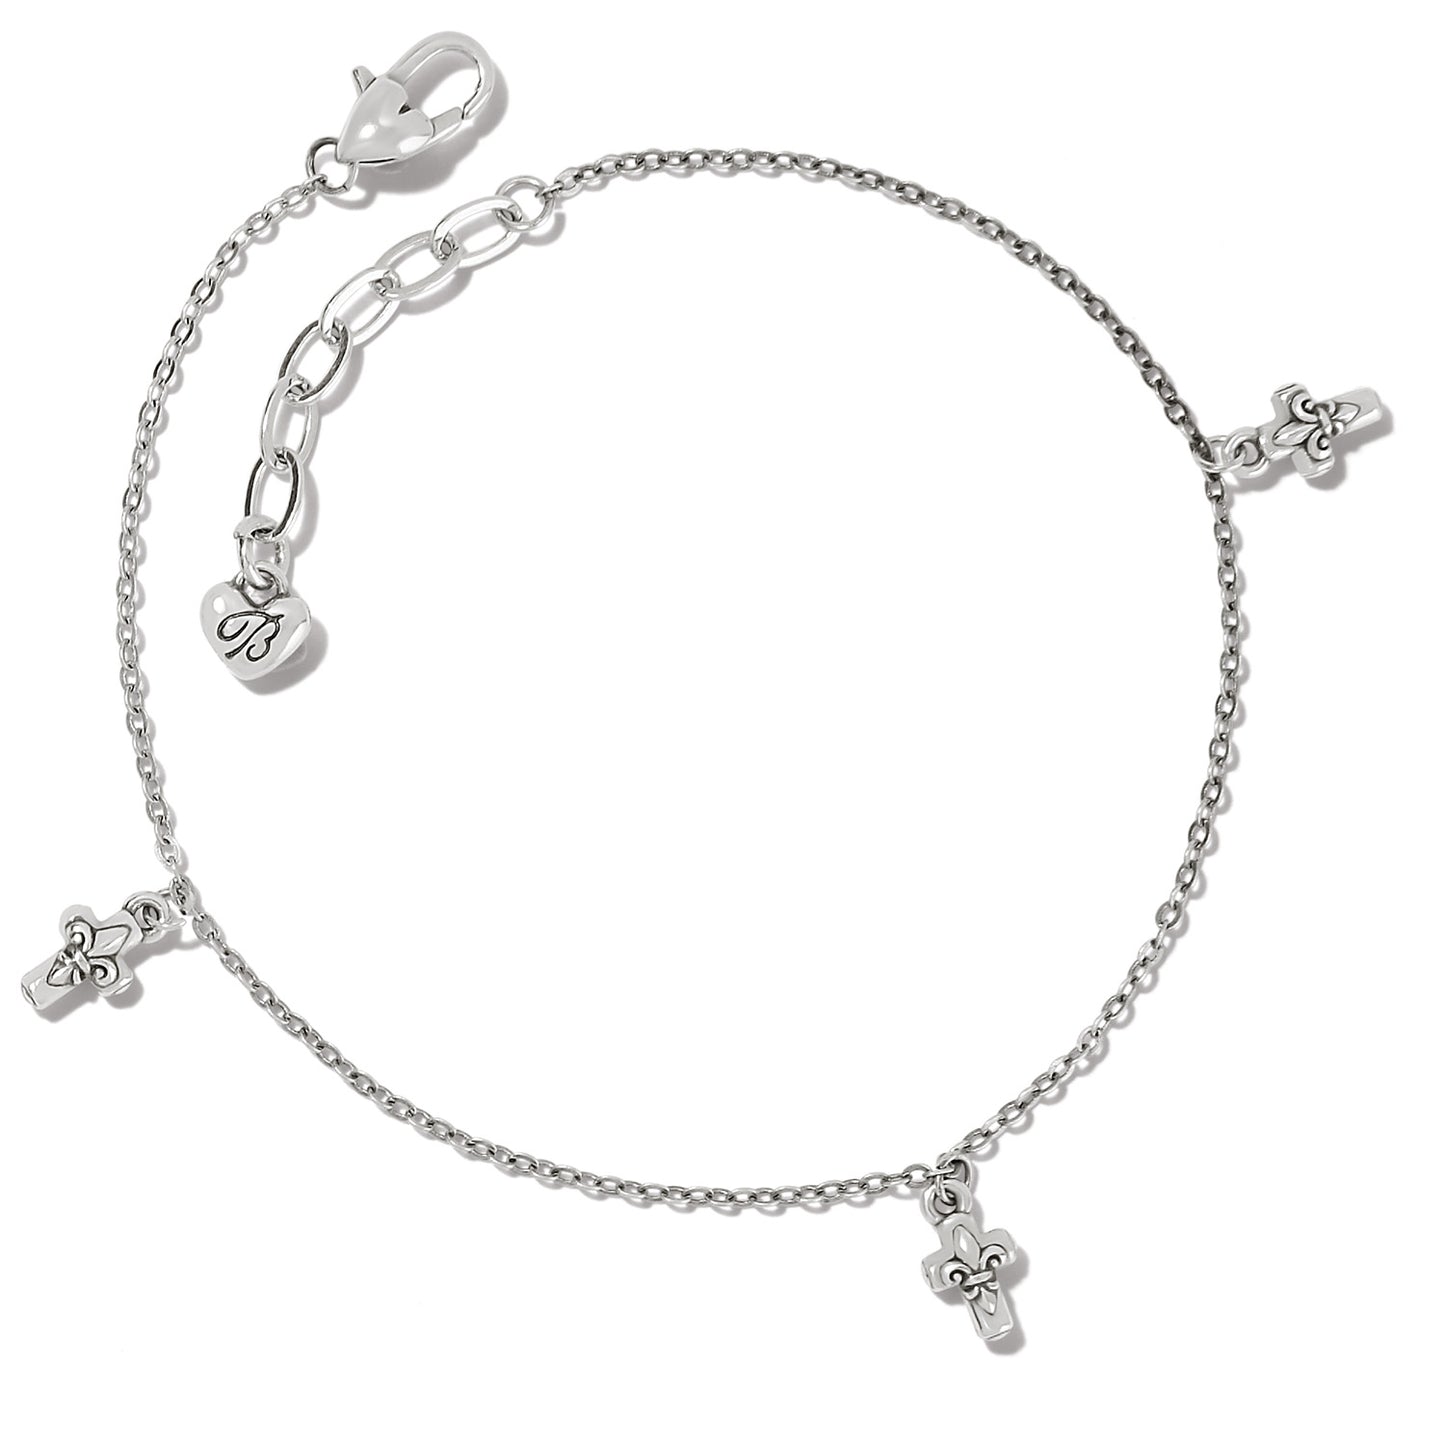 Cross Anklet by Brighton features three delicate cross charms. Silver plated, 9" - 10" Adjustable closure. Shop at The Painted Cottage in Edgewater, MD.